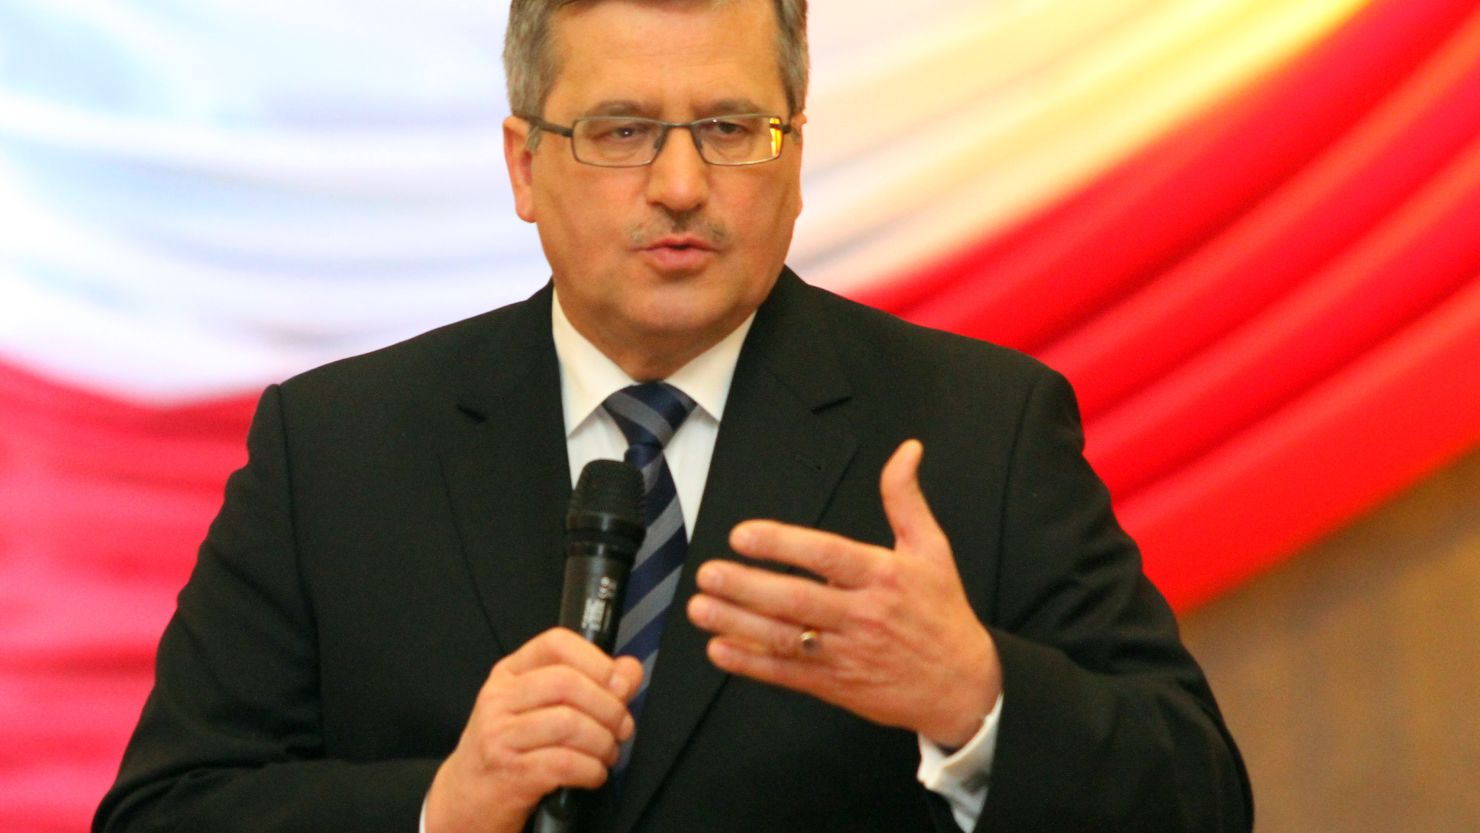 Polish President Bronislaw Komorowski lost out to challenger Andrzej Duda in Sunday's elections.